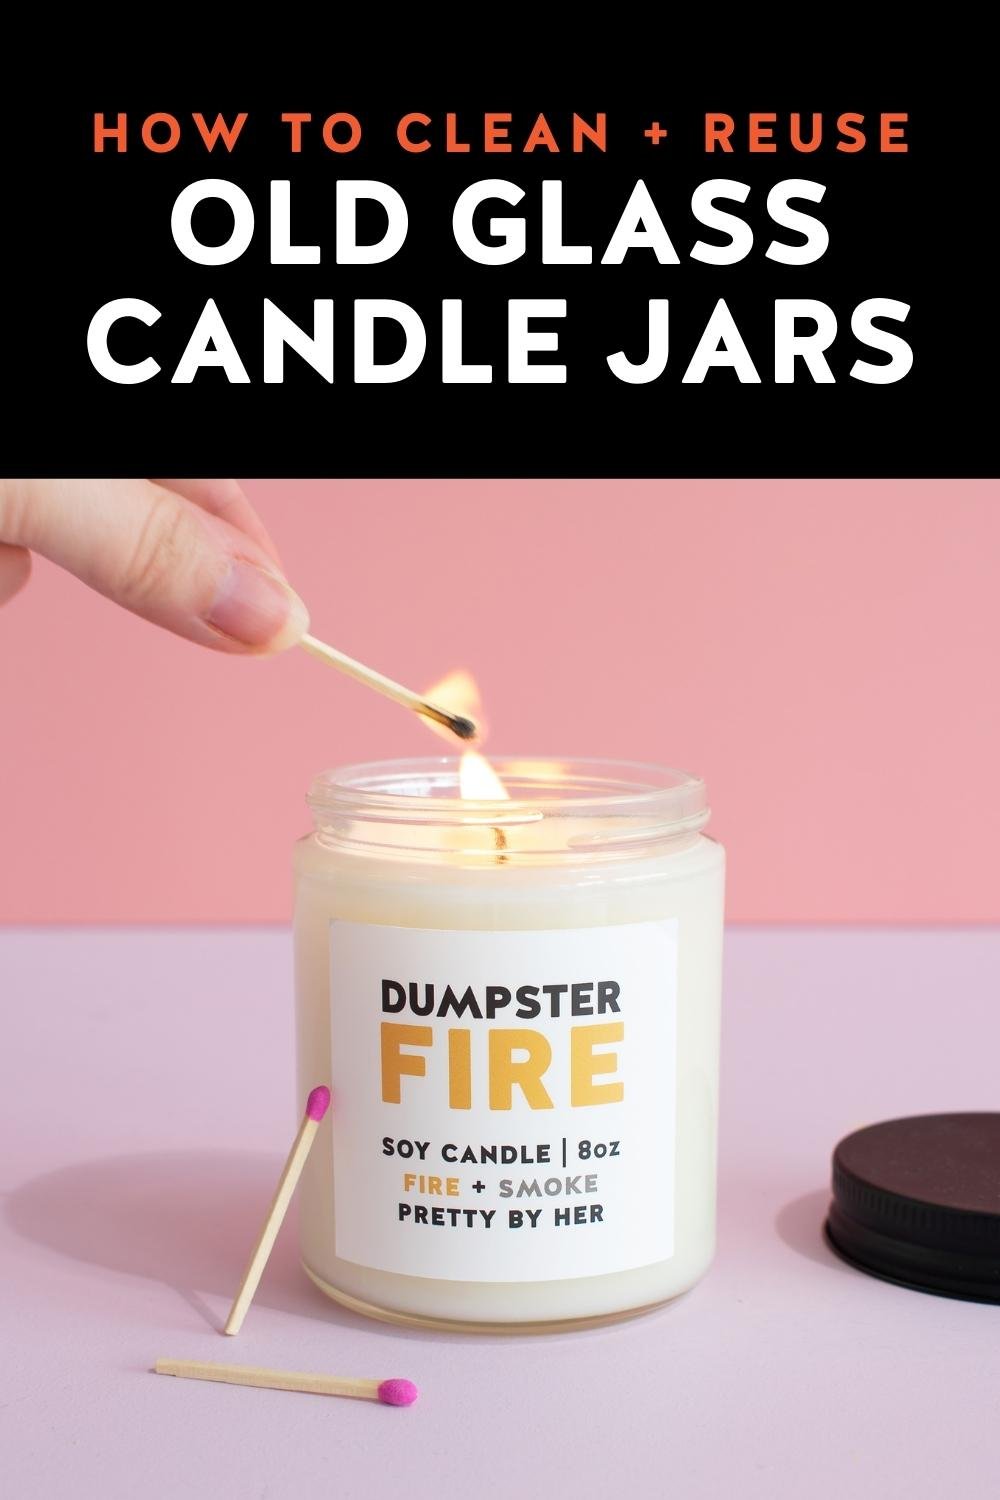 How to clean + reuse empty candle jars - Pretty by Her